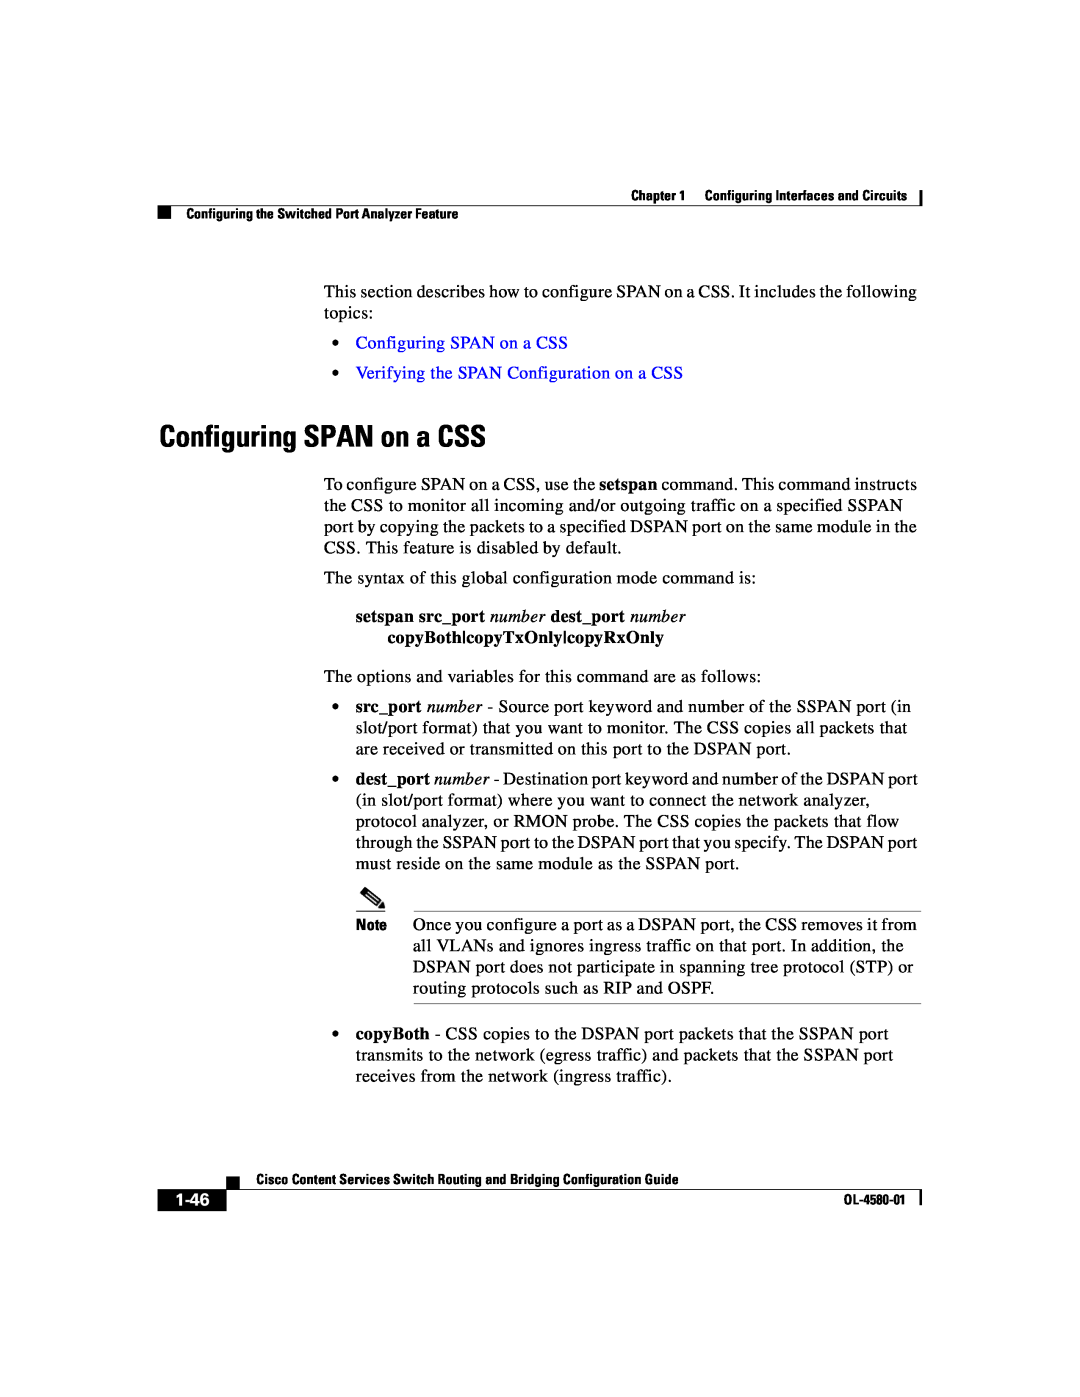 Cisco Systems OL-4580-01 manual Configuring SPAN on a CSS Verifying the SPAN Configuration on a CSS, 1-46 